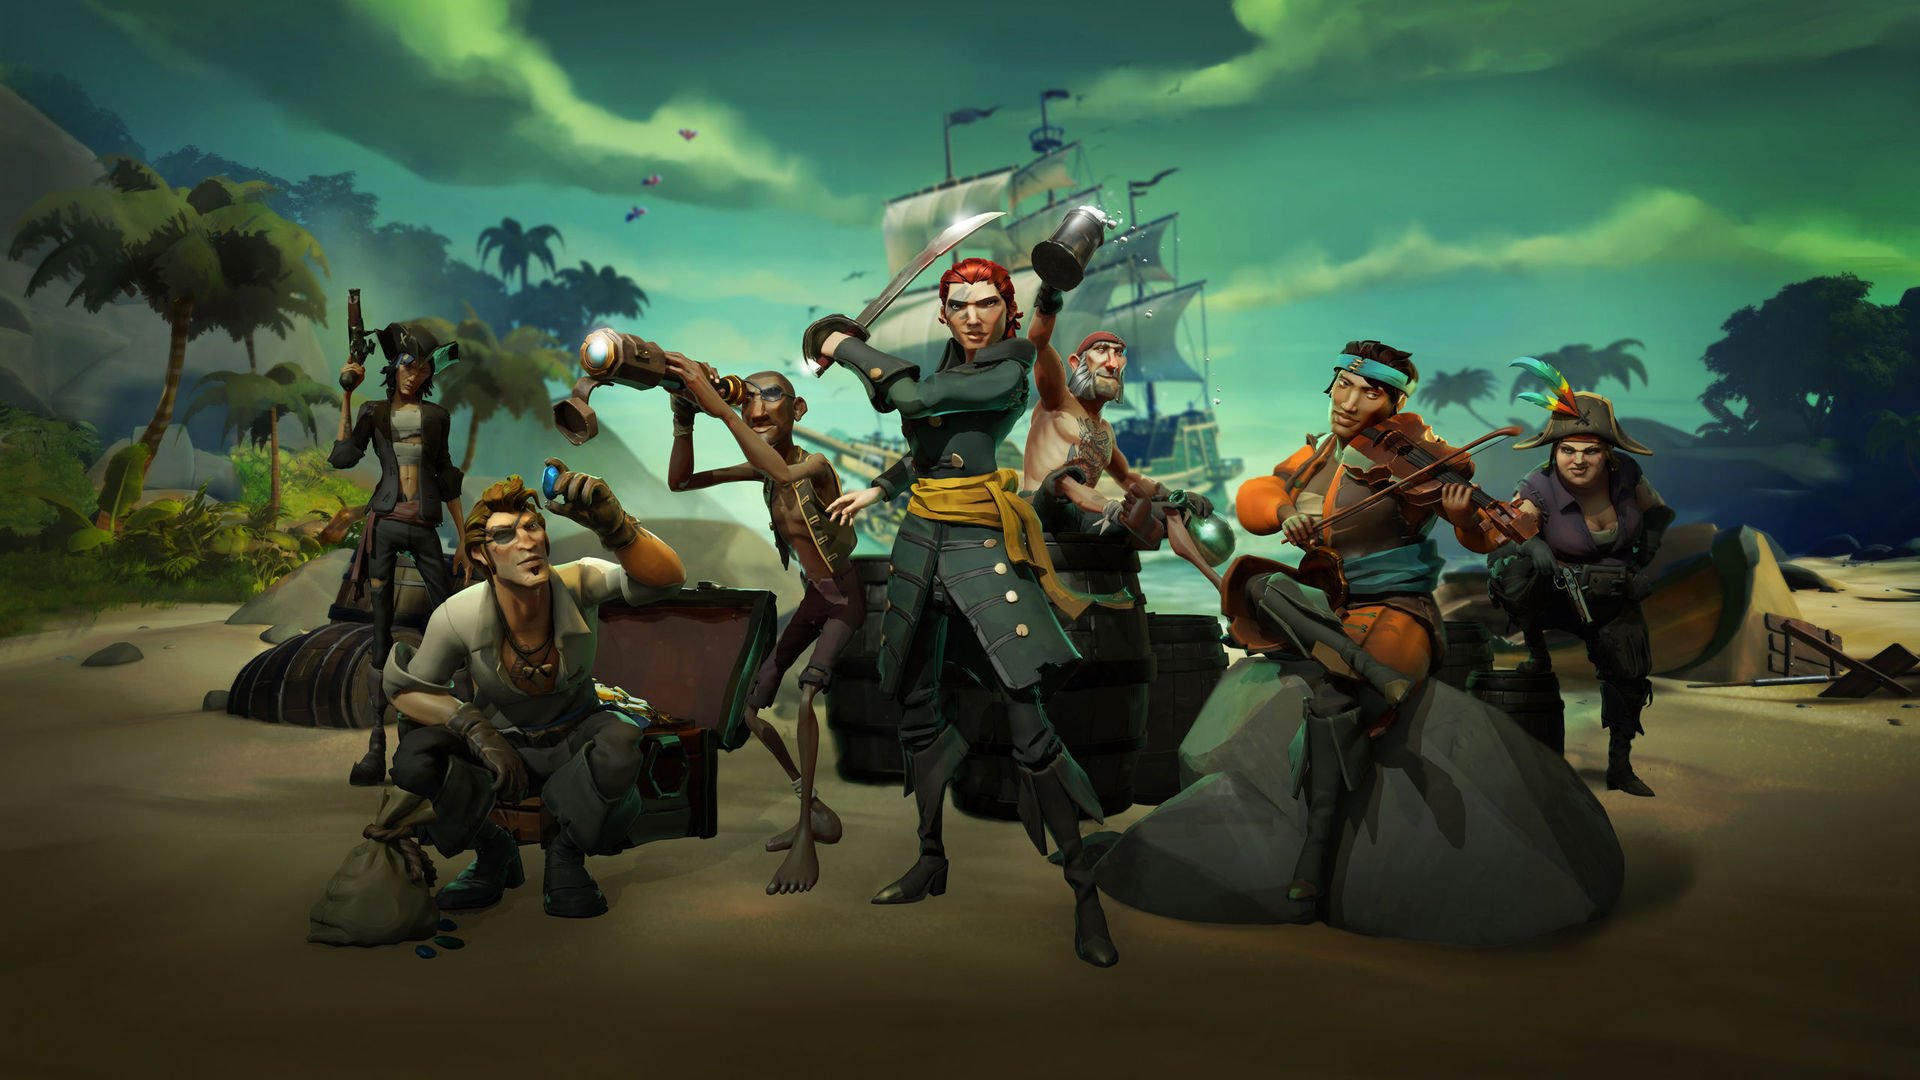 Sea of Thieves update brings Skeleton Thrones event, color blind accessibility